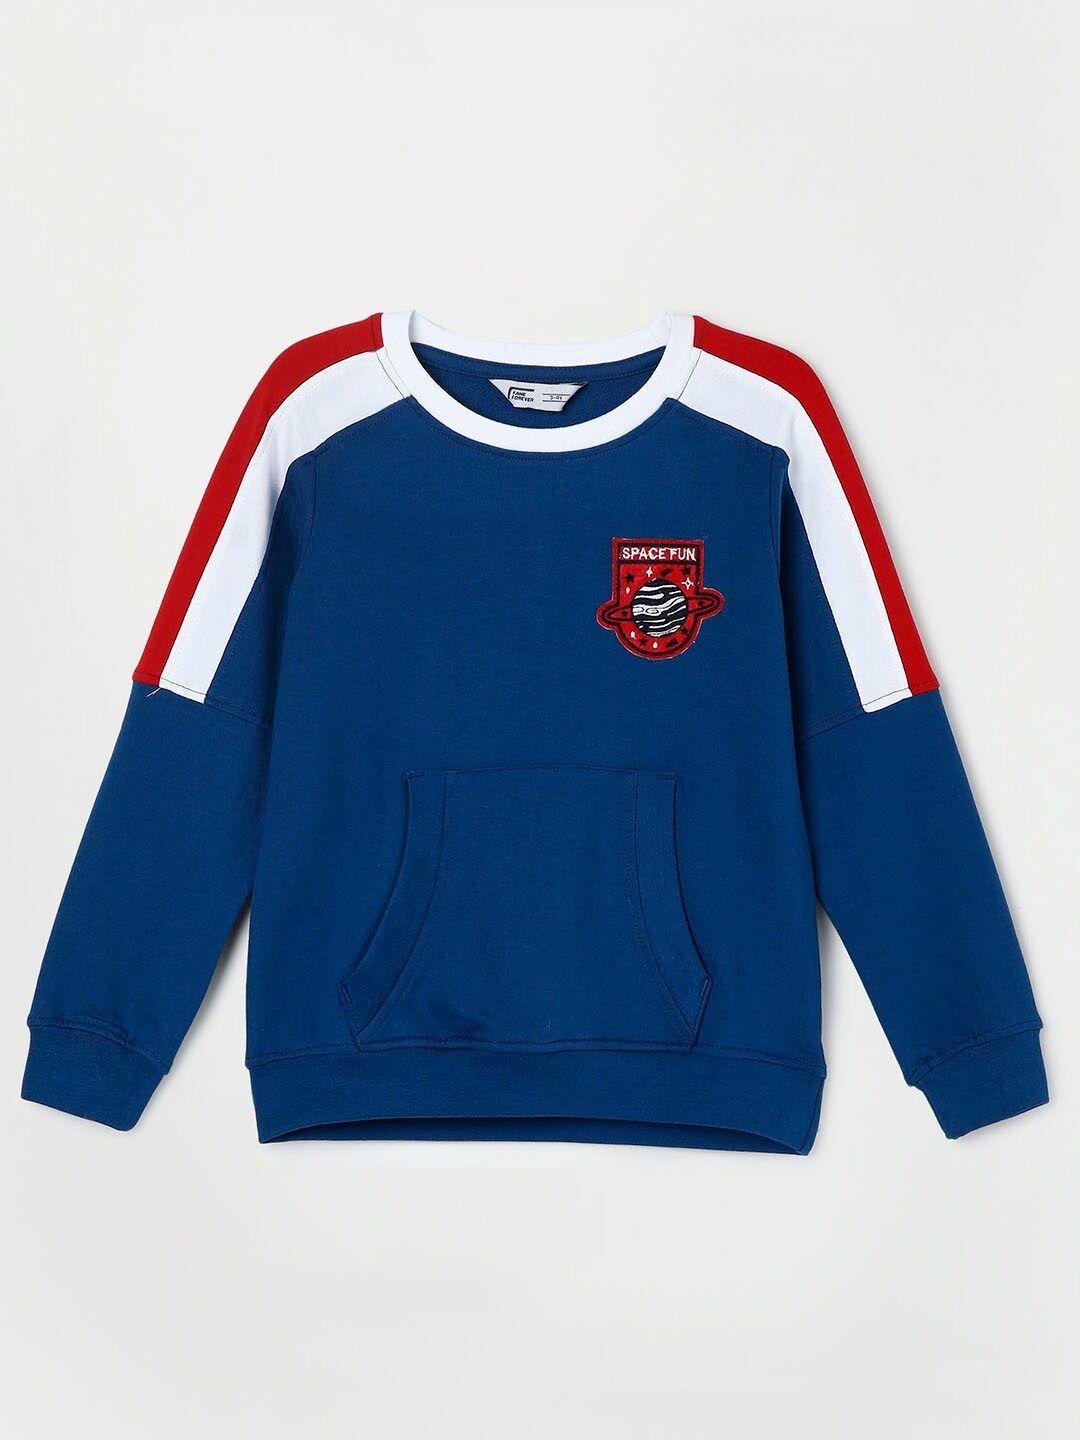 fame-forever-by-lifestyle-boys-cotton-sweatshirt